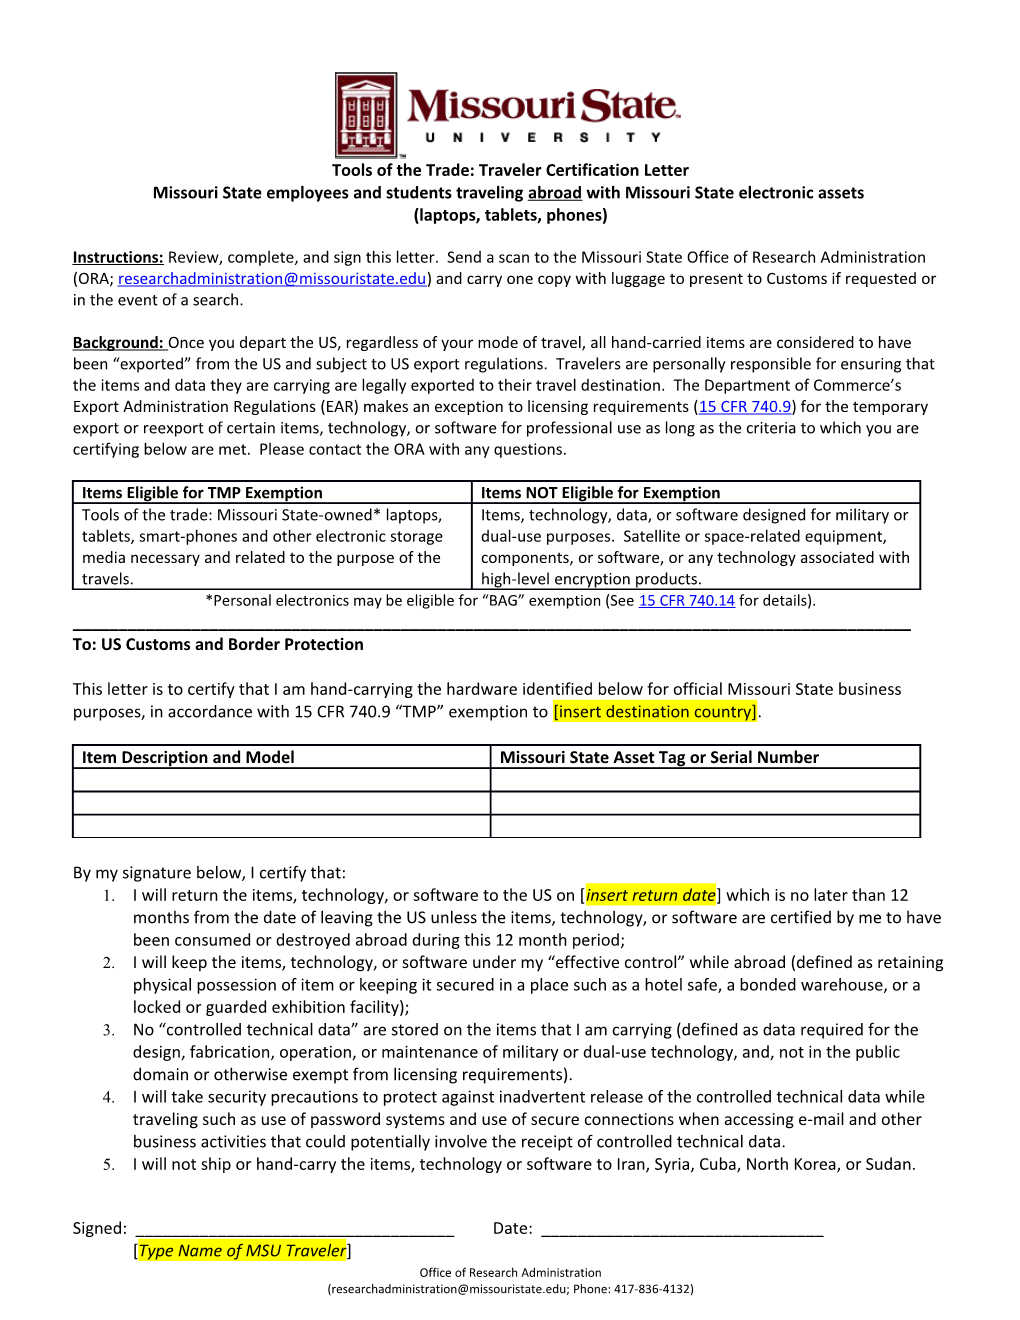 Tools of the Trade: Traveler Certification Letter